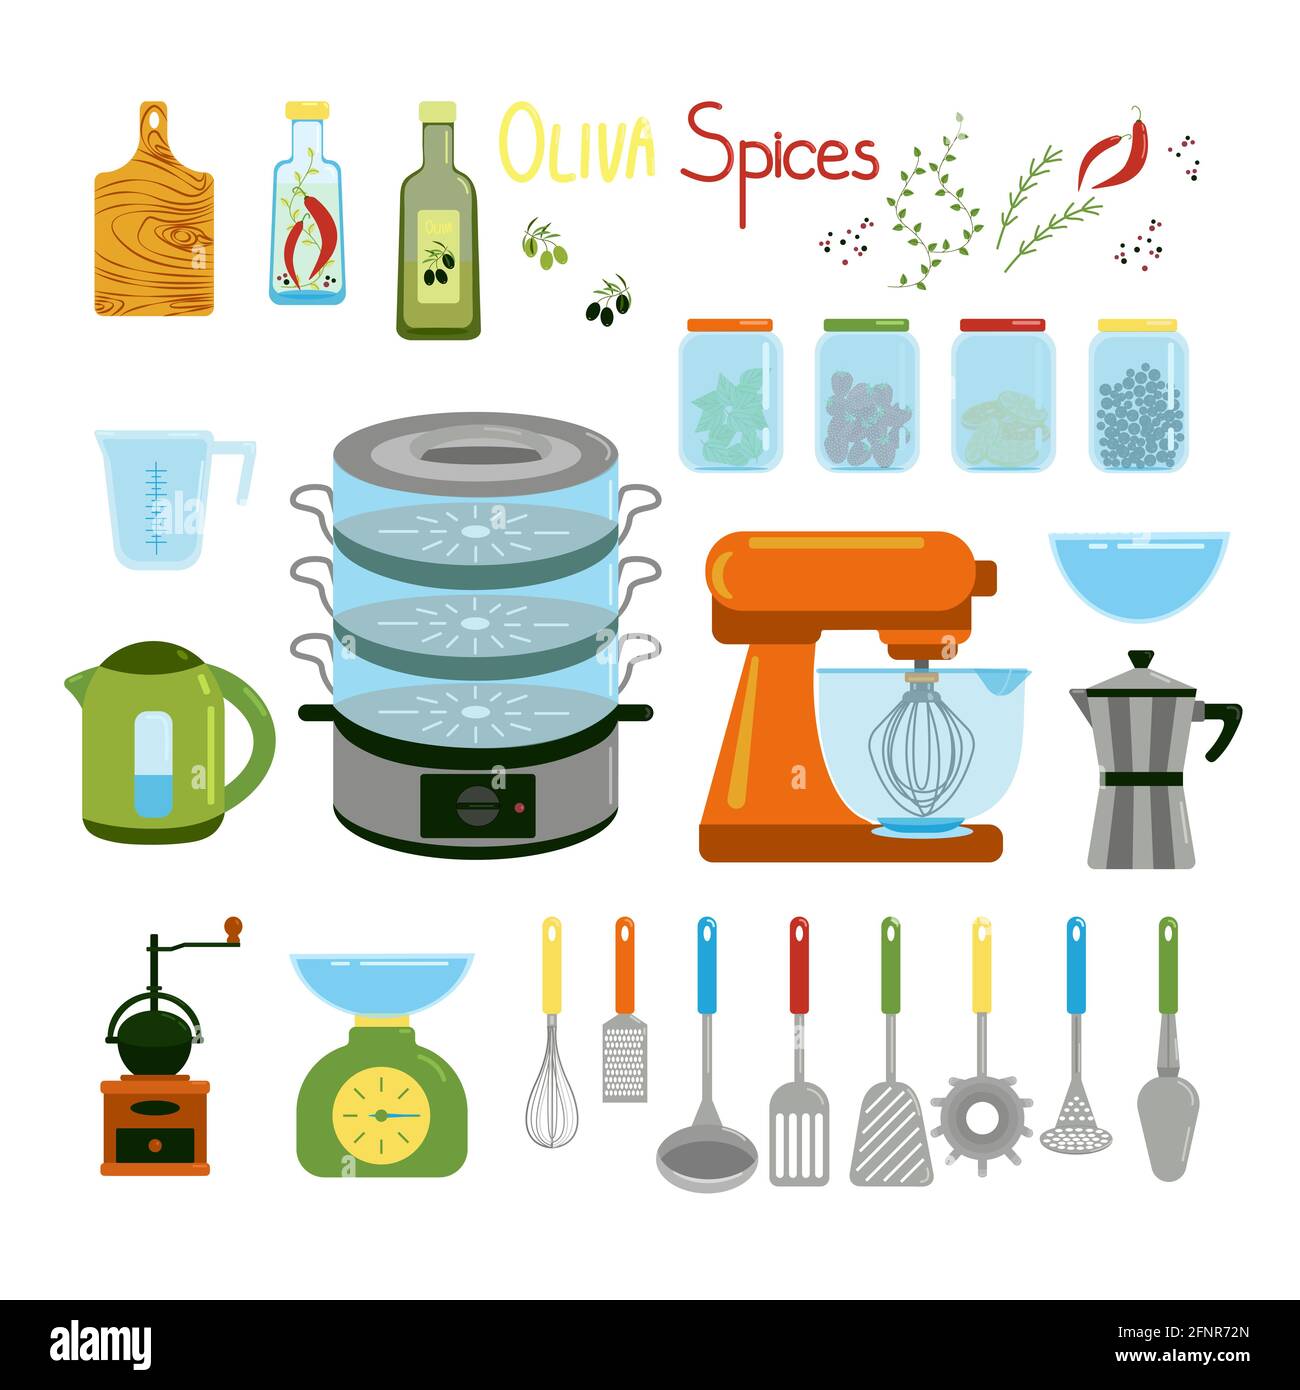 https://c8.alamy.com/comp/2FNR72N/kitchen-items-kettle-mixer-geyser-coffee-maker-steamer-captive-and-various-spatulas-for-cooking-spices-in-jars-and-olive-oil-vector-clipart-in-2FNR72N.jpg